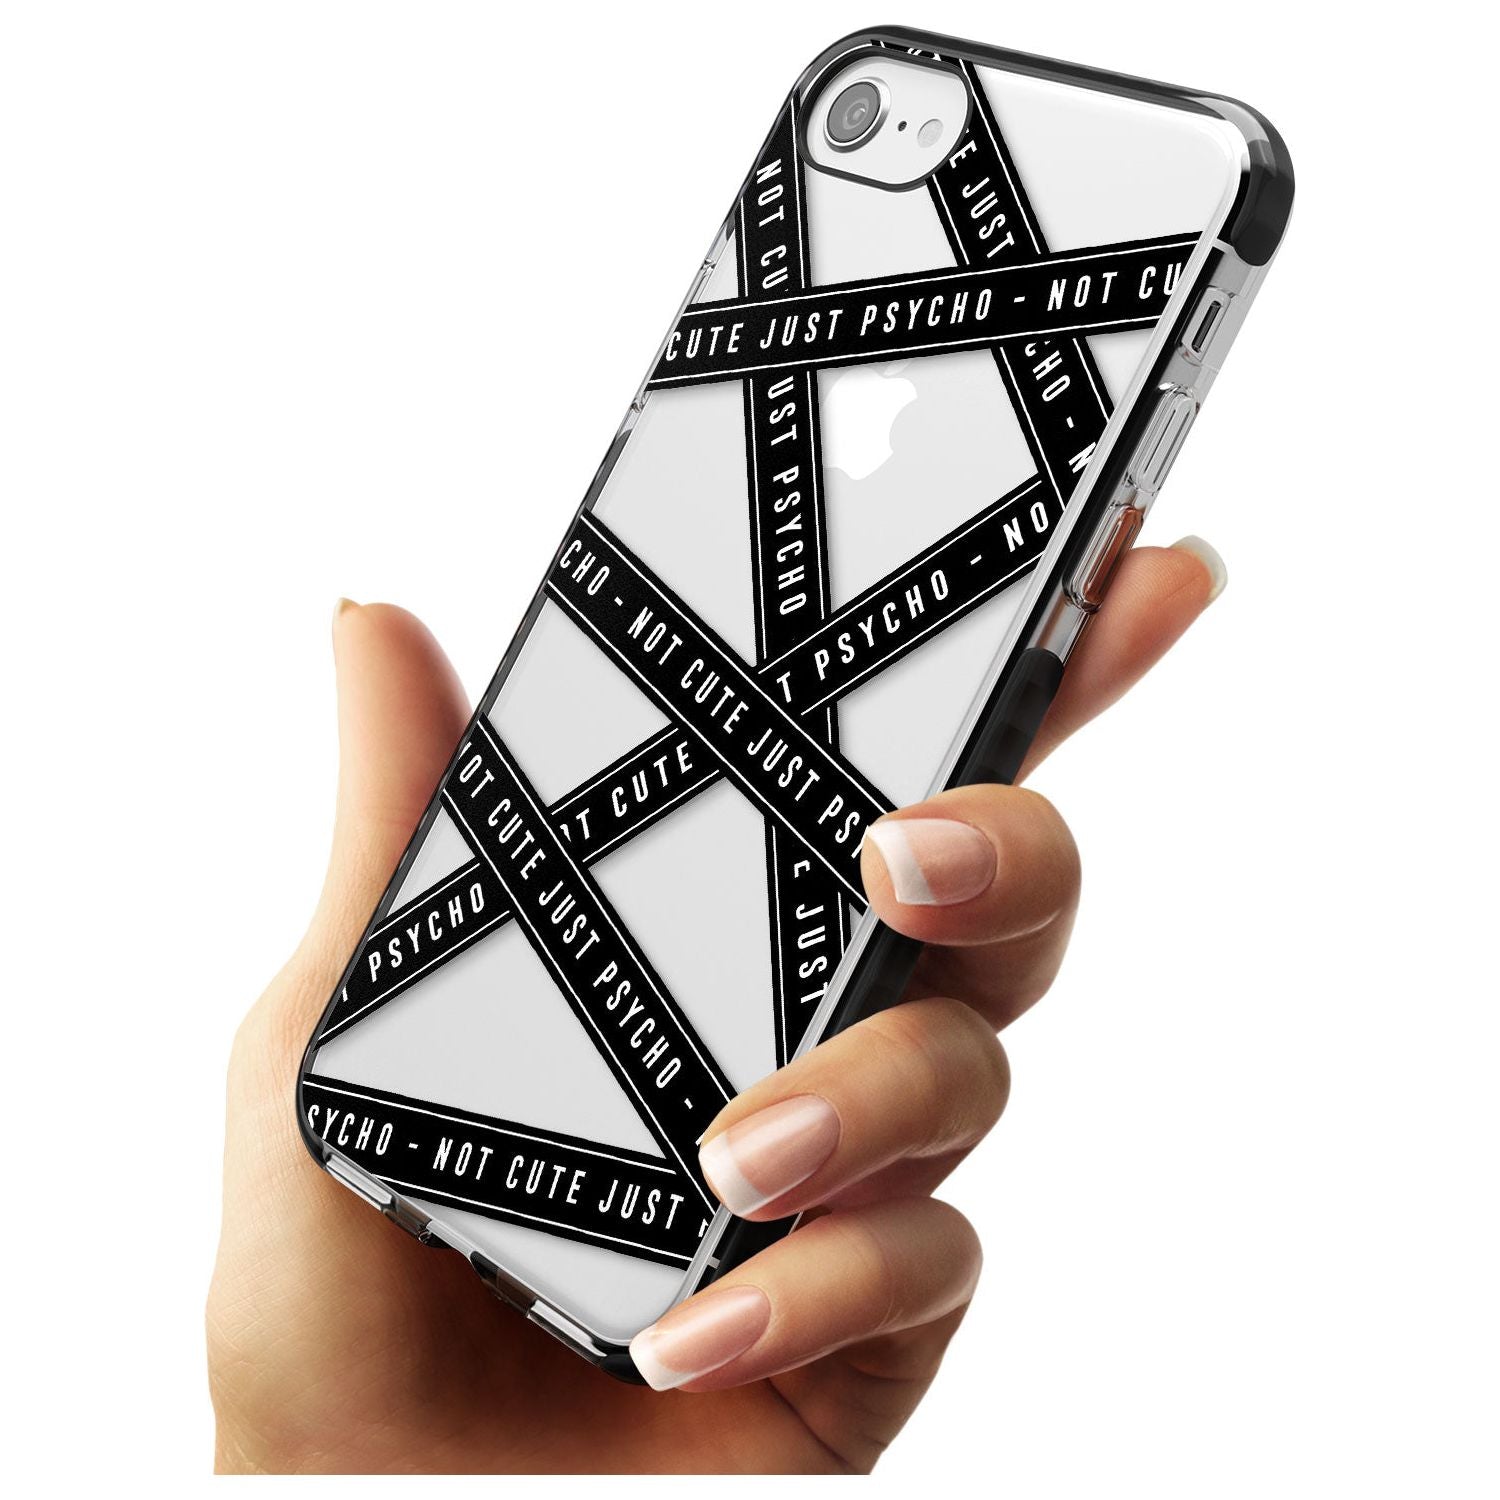 Caution Tape (Clear) Not Cute Just Psycho Black Impact Phone Case for iPhone SE 8 7 Plus